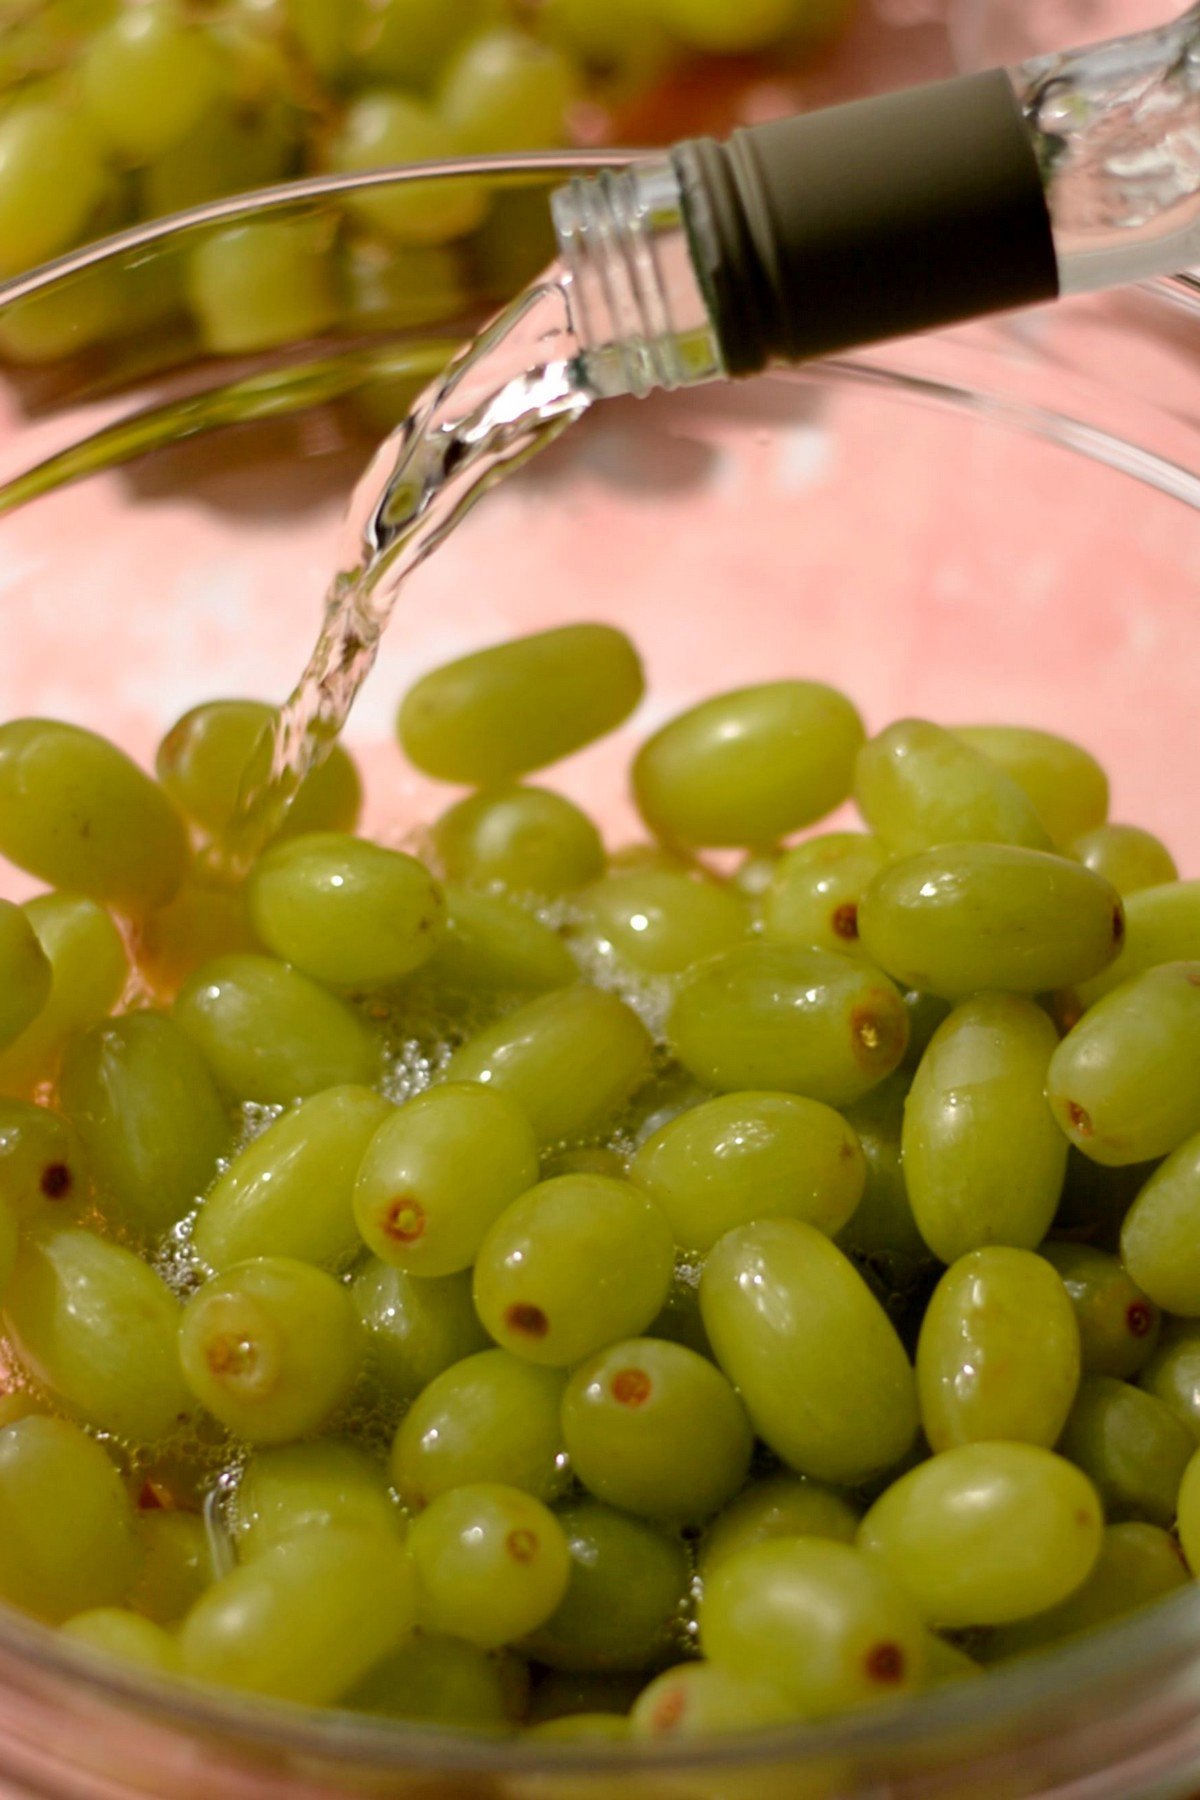 Wine being poured into a bowl of grapes.